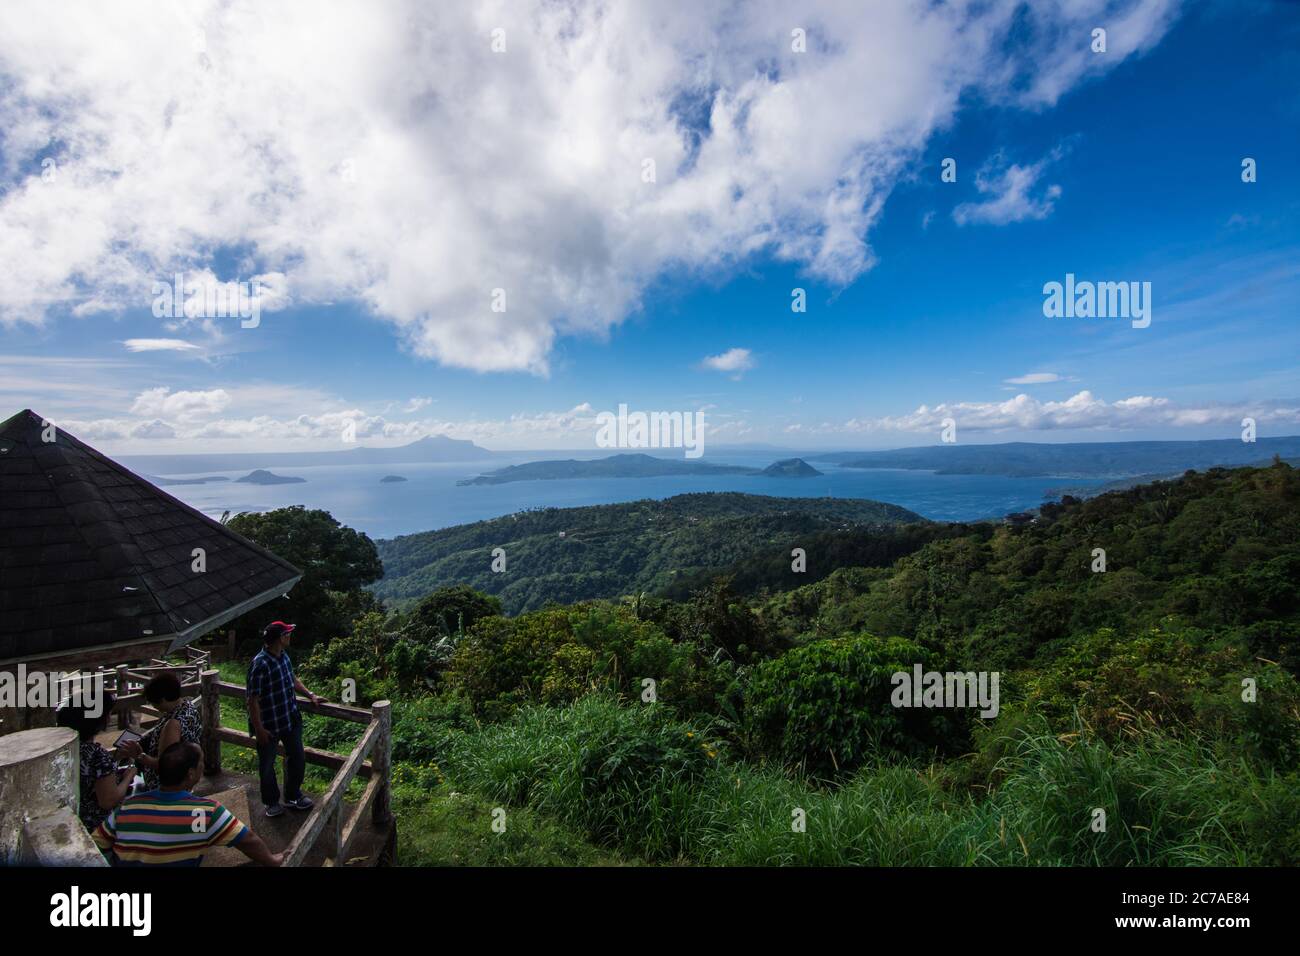 Tagaytay, Philippines - January 12, 2017: View of Taal Lake and Taal Volcano Stock Photo